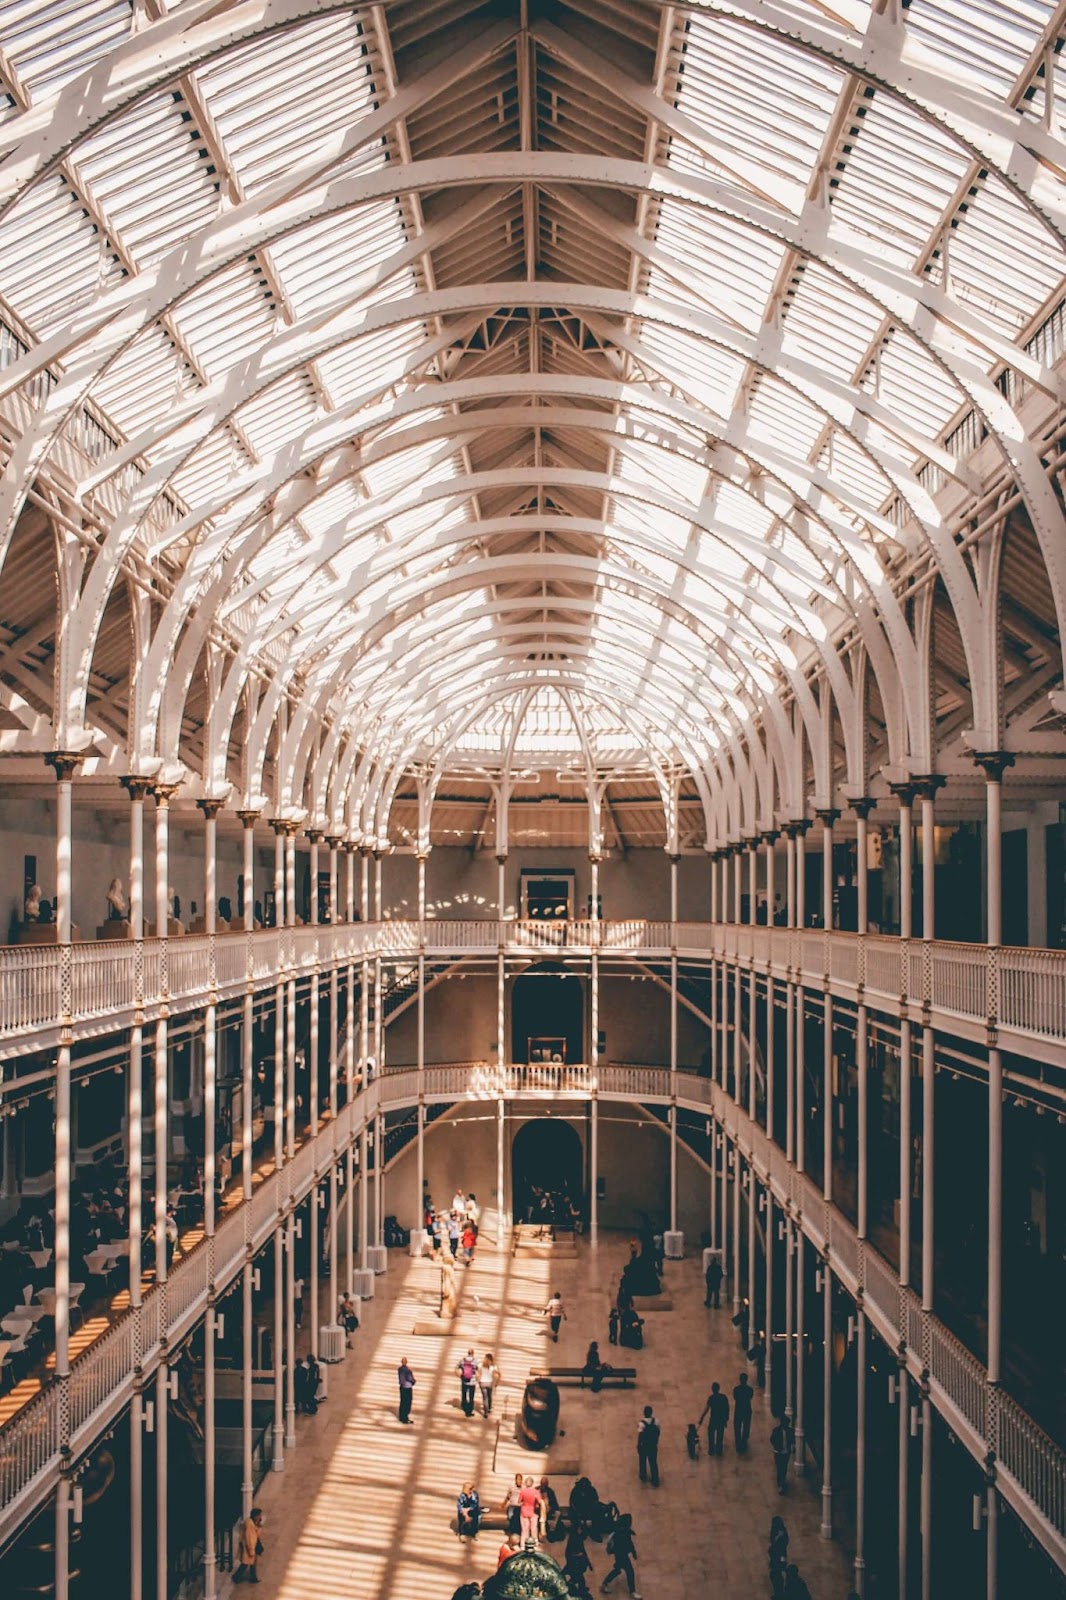 24 hours in Edinburgh. This is an image of the Grand Gallery of the former Chambers Street Museum.